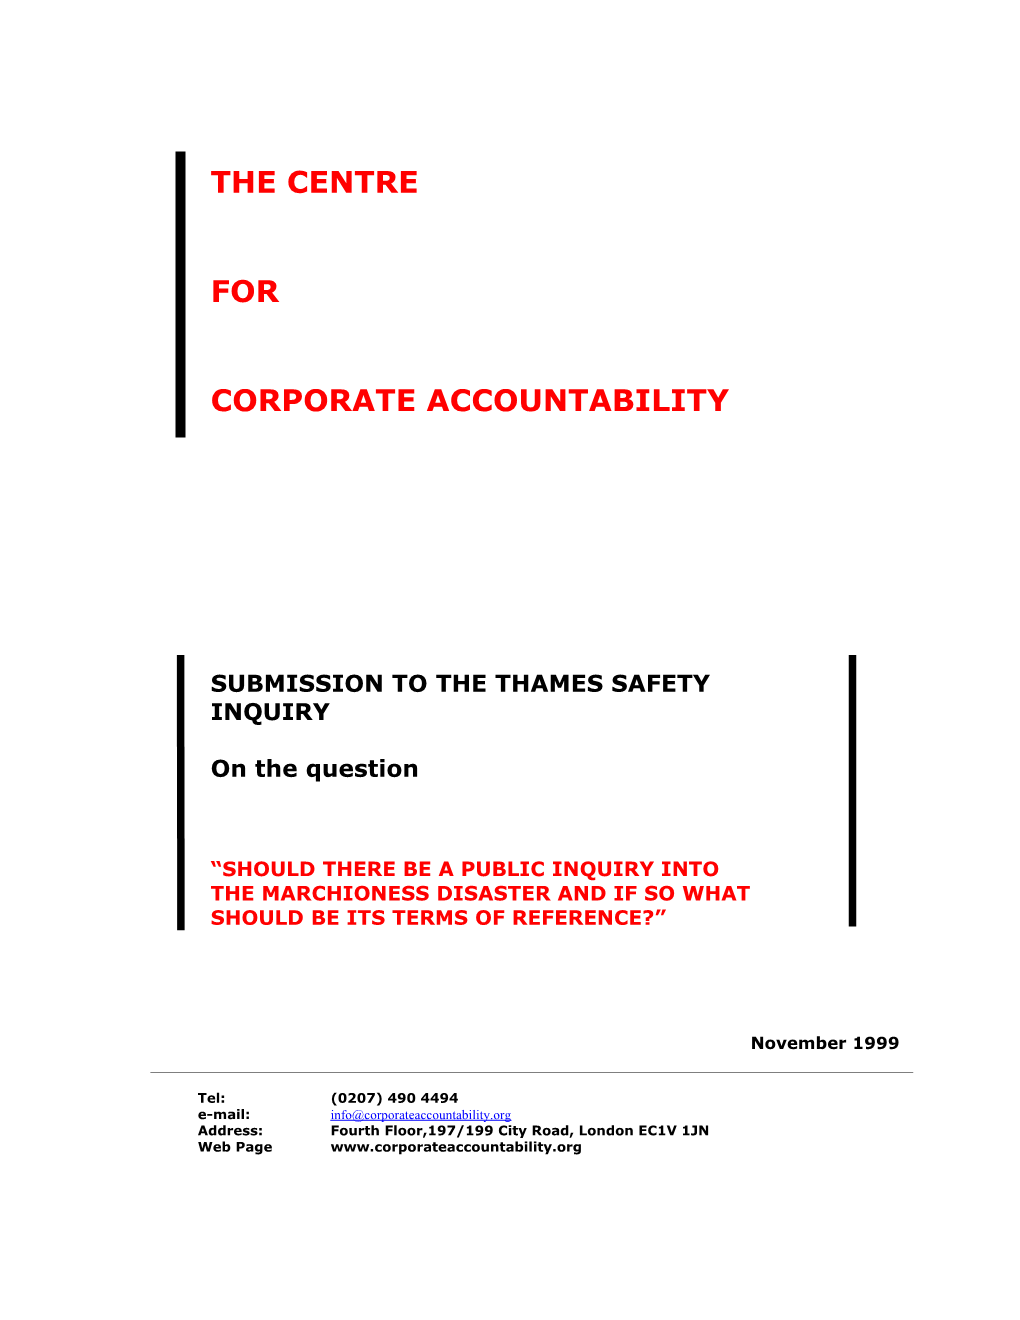 Submission to the Thames Safety Inquiry